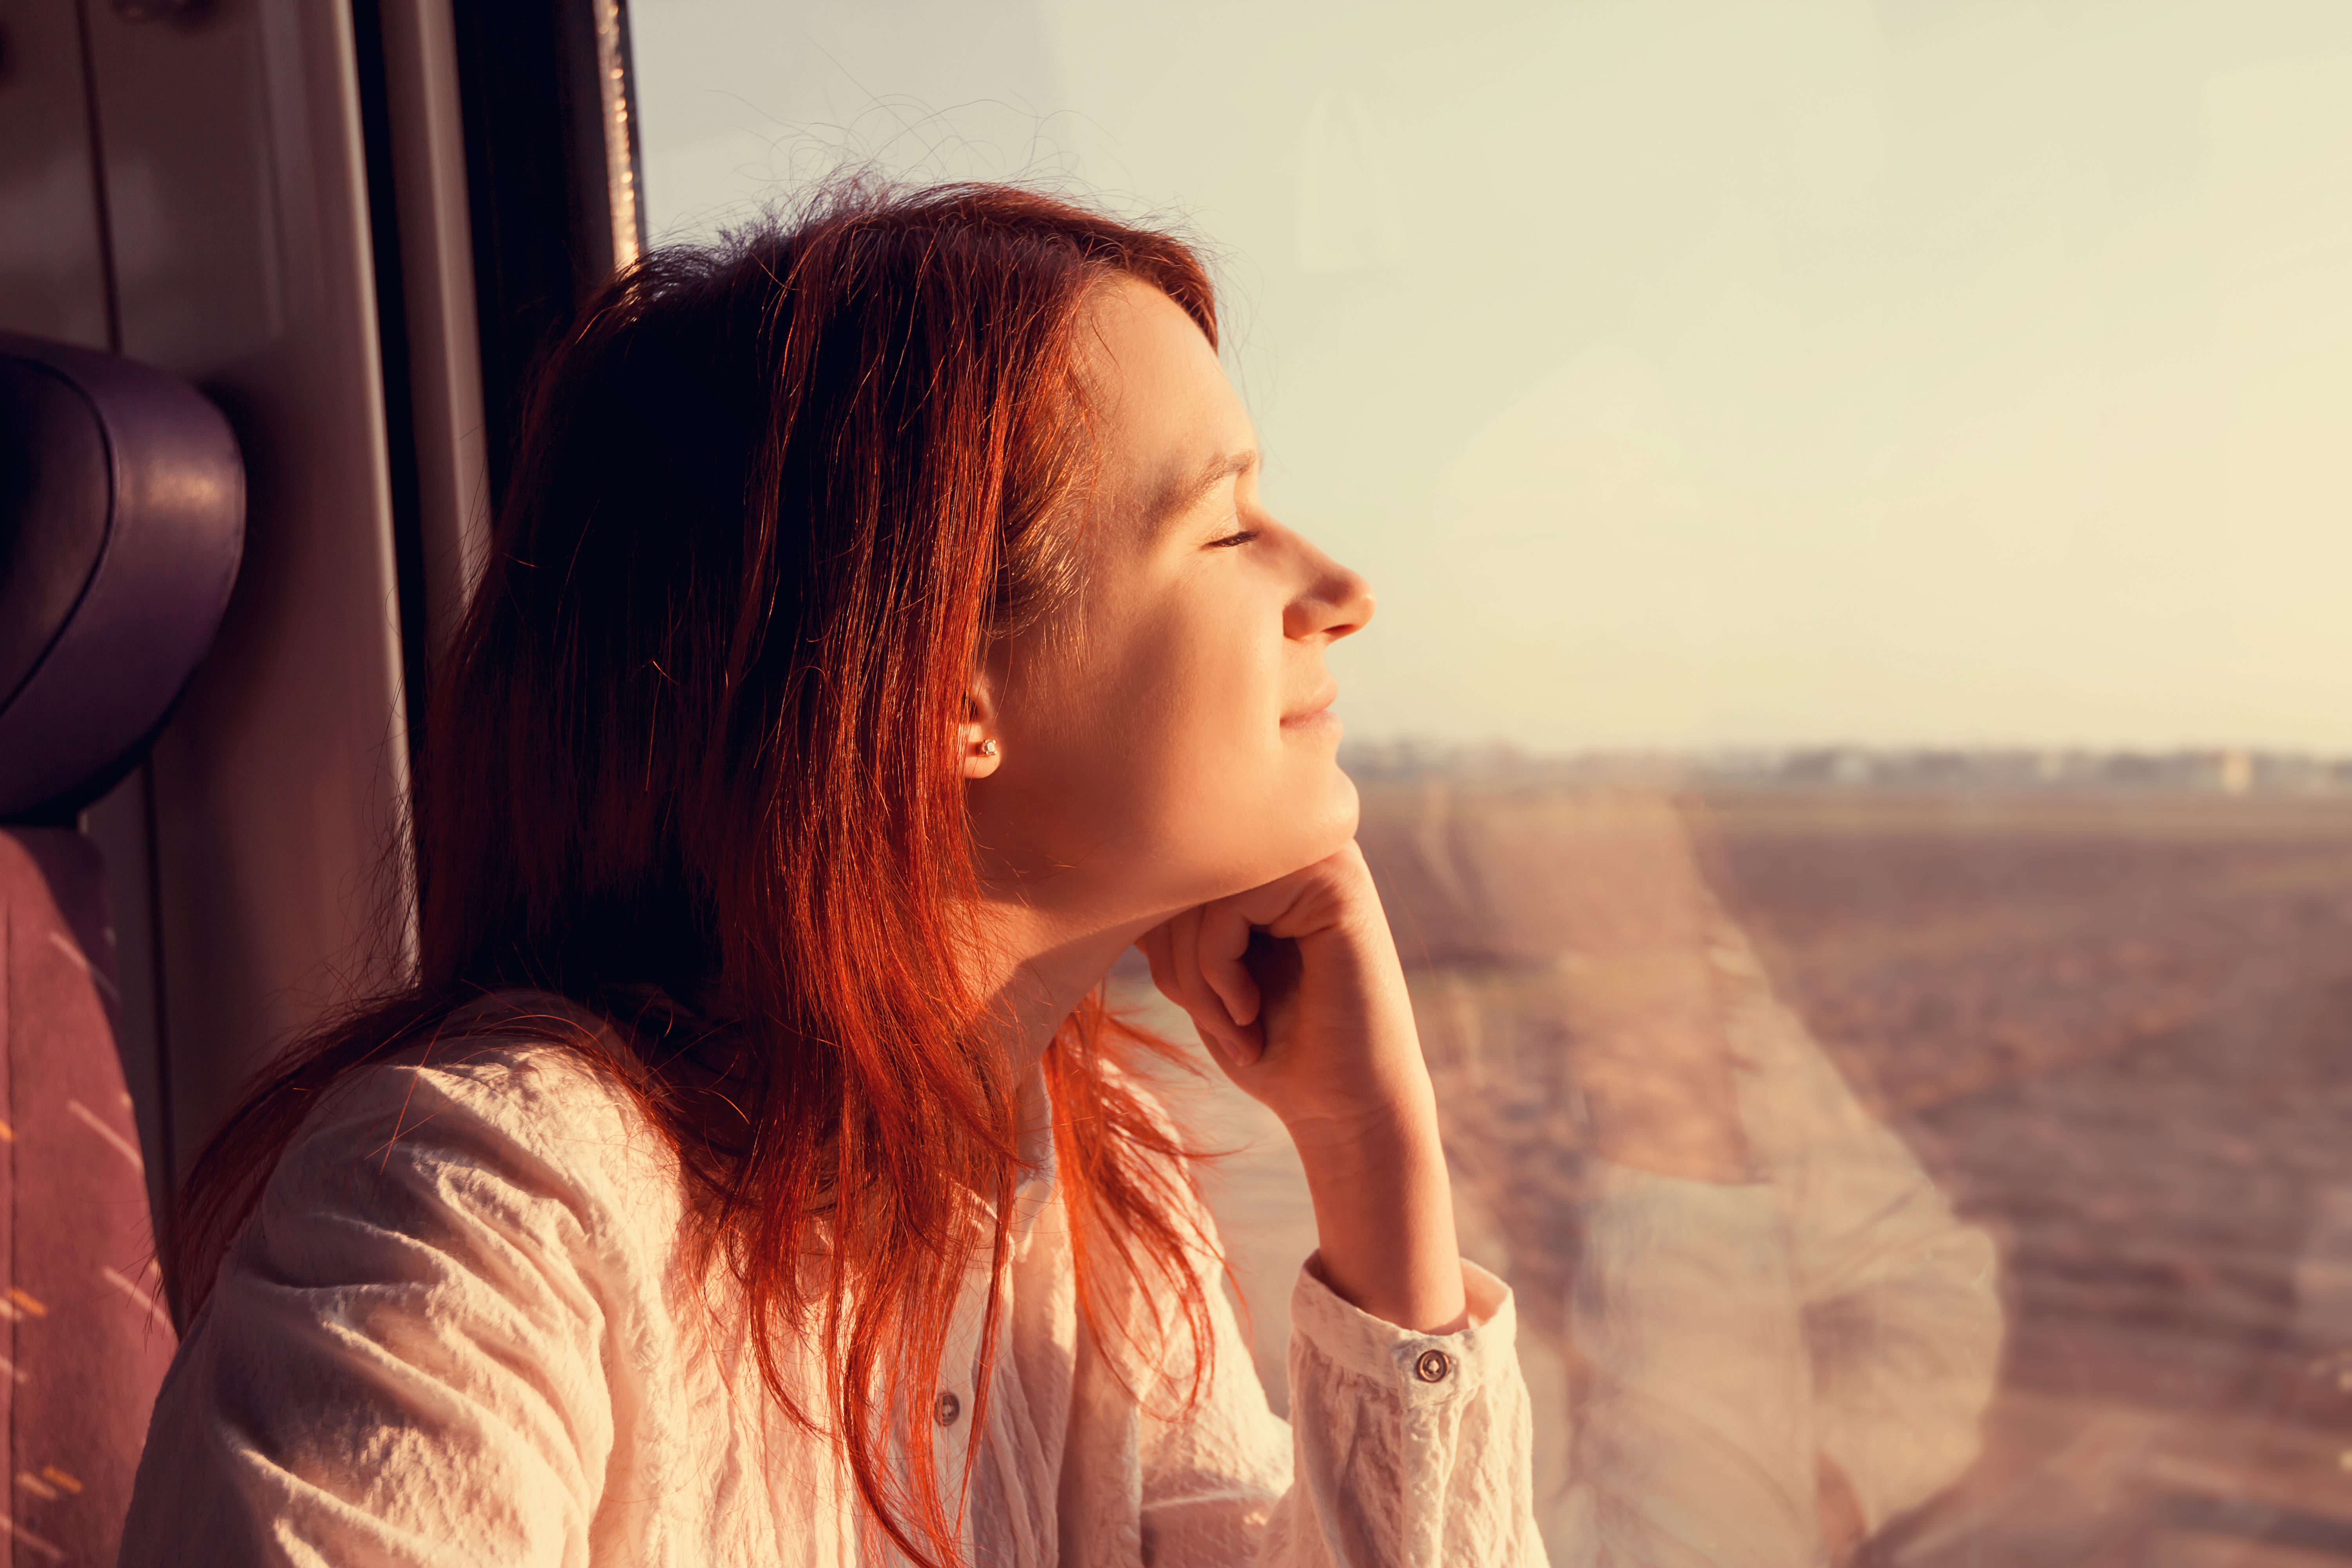 A young woman looks relaxed and satisfied as she looks out a train window while traveling